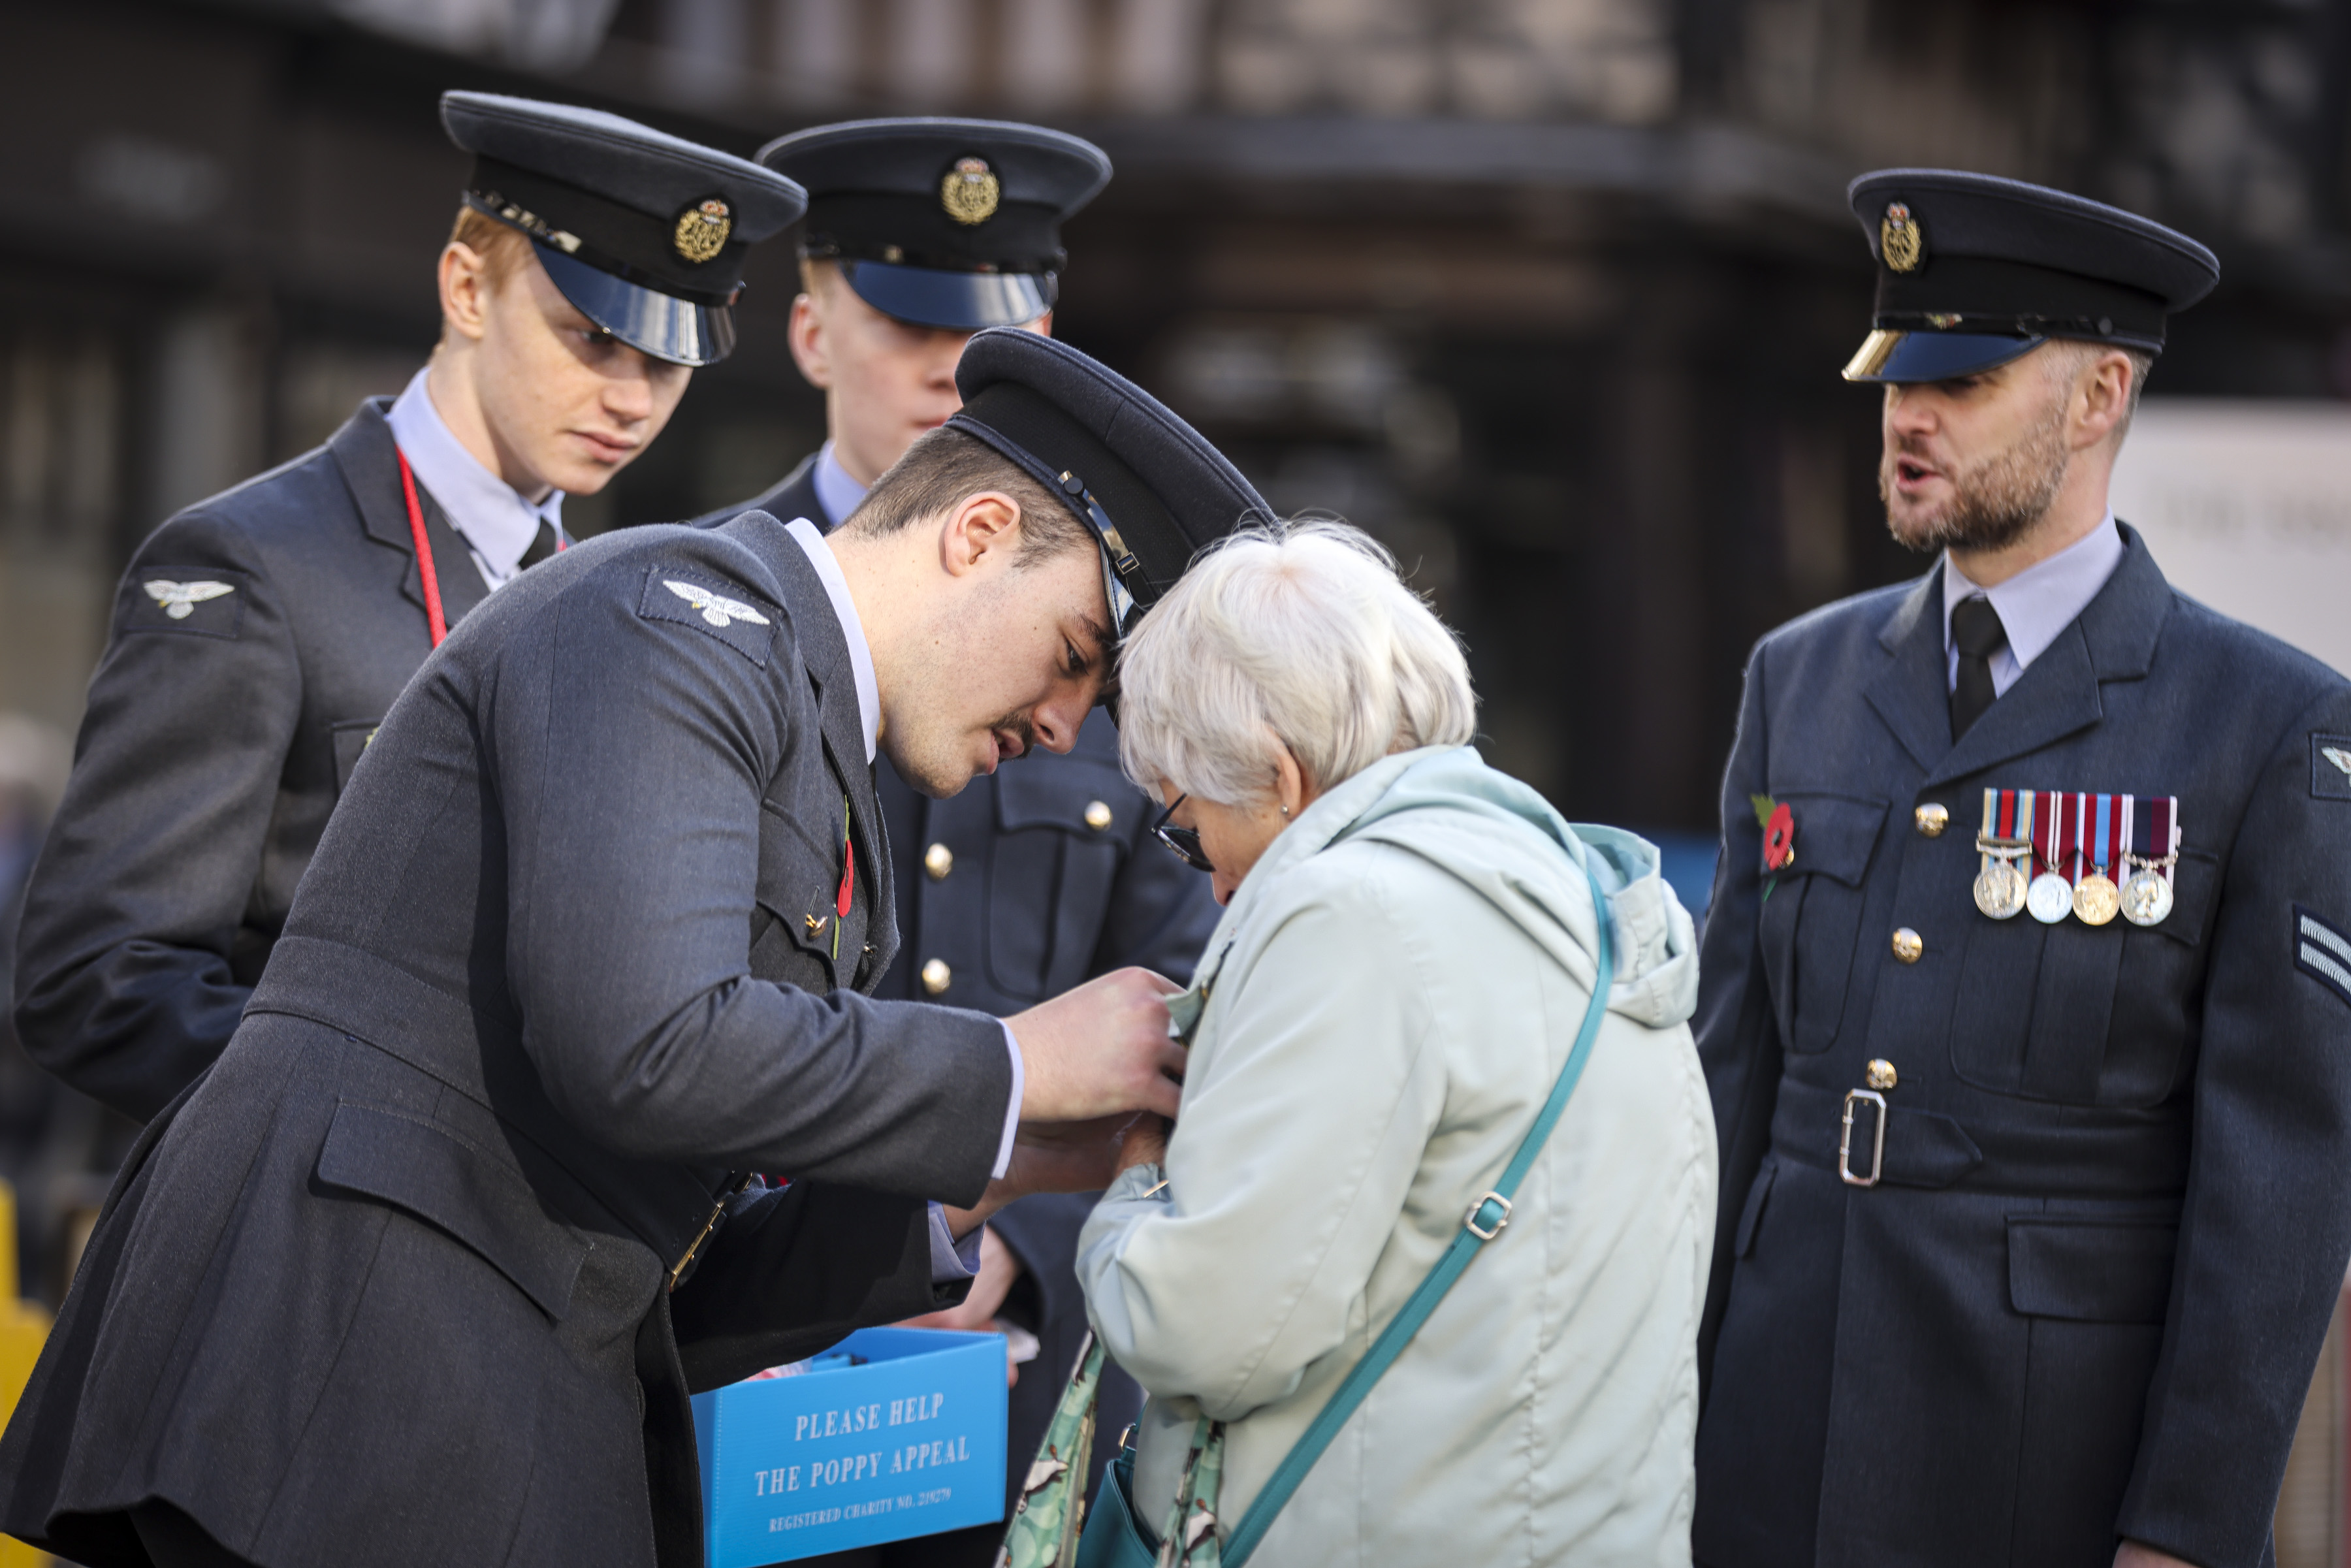 An RAF Cosford Apprentice helps place a poppy on a supporter on their coat within Shrewsbury town centre. 